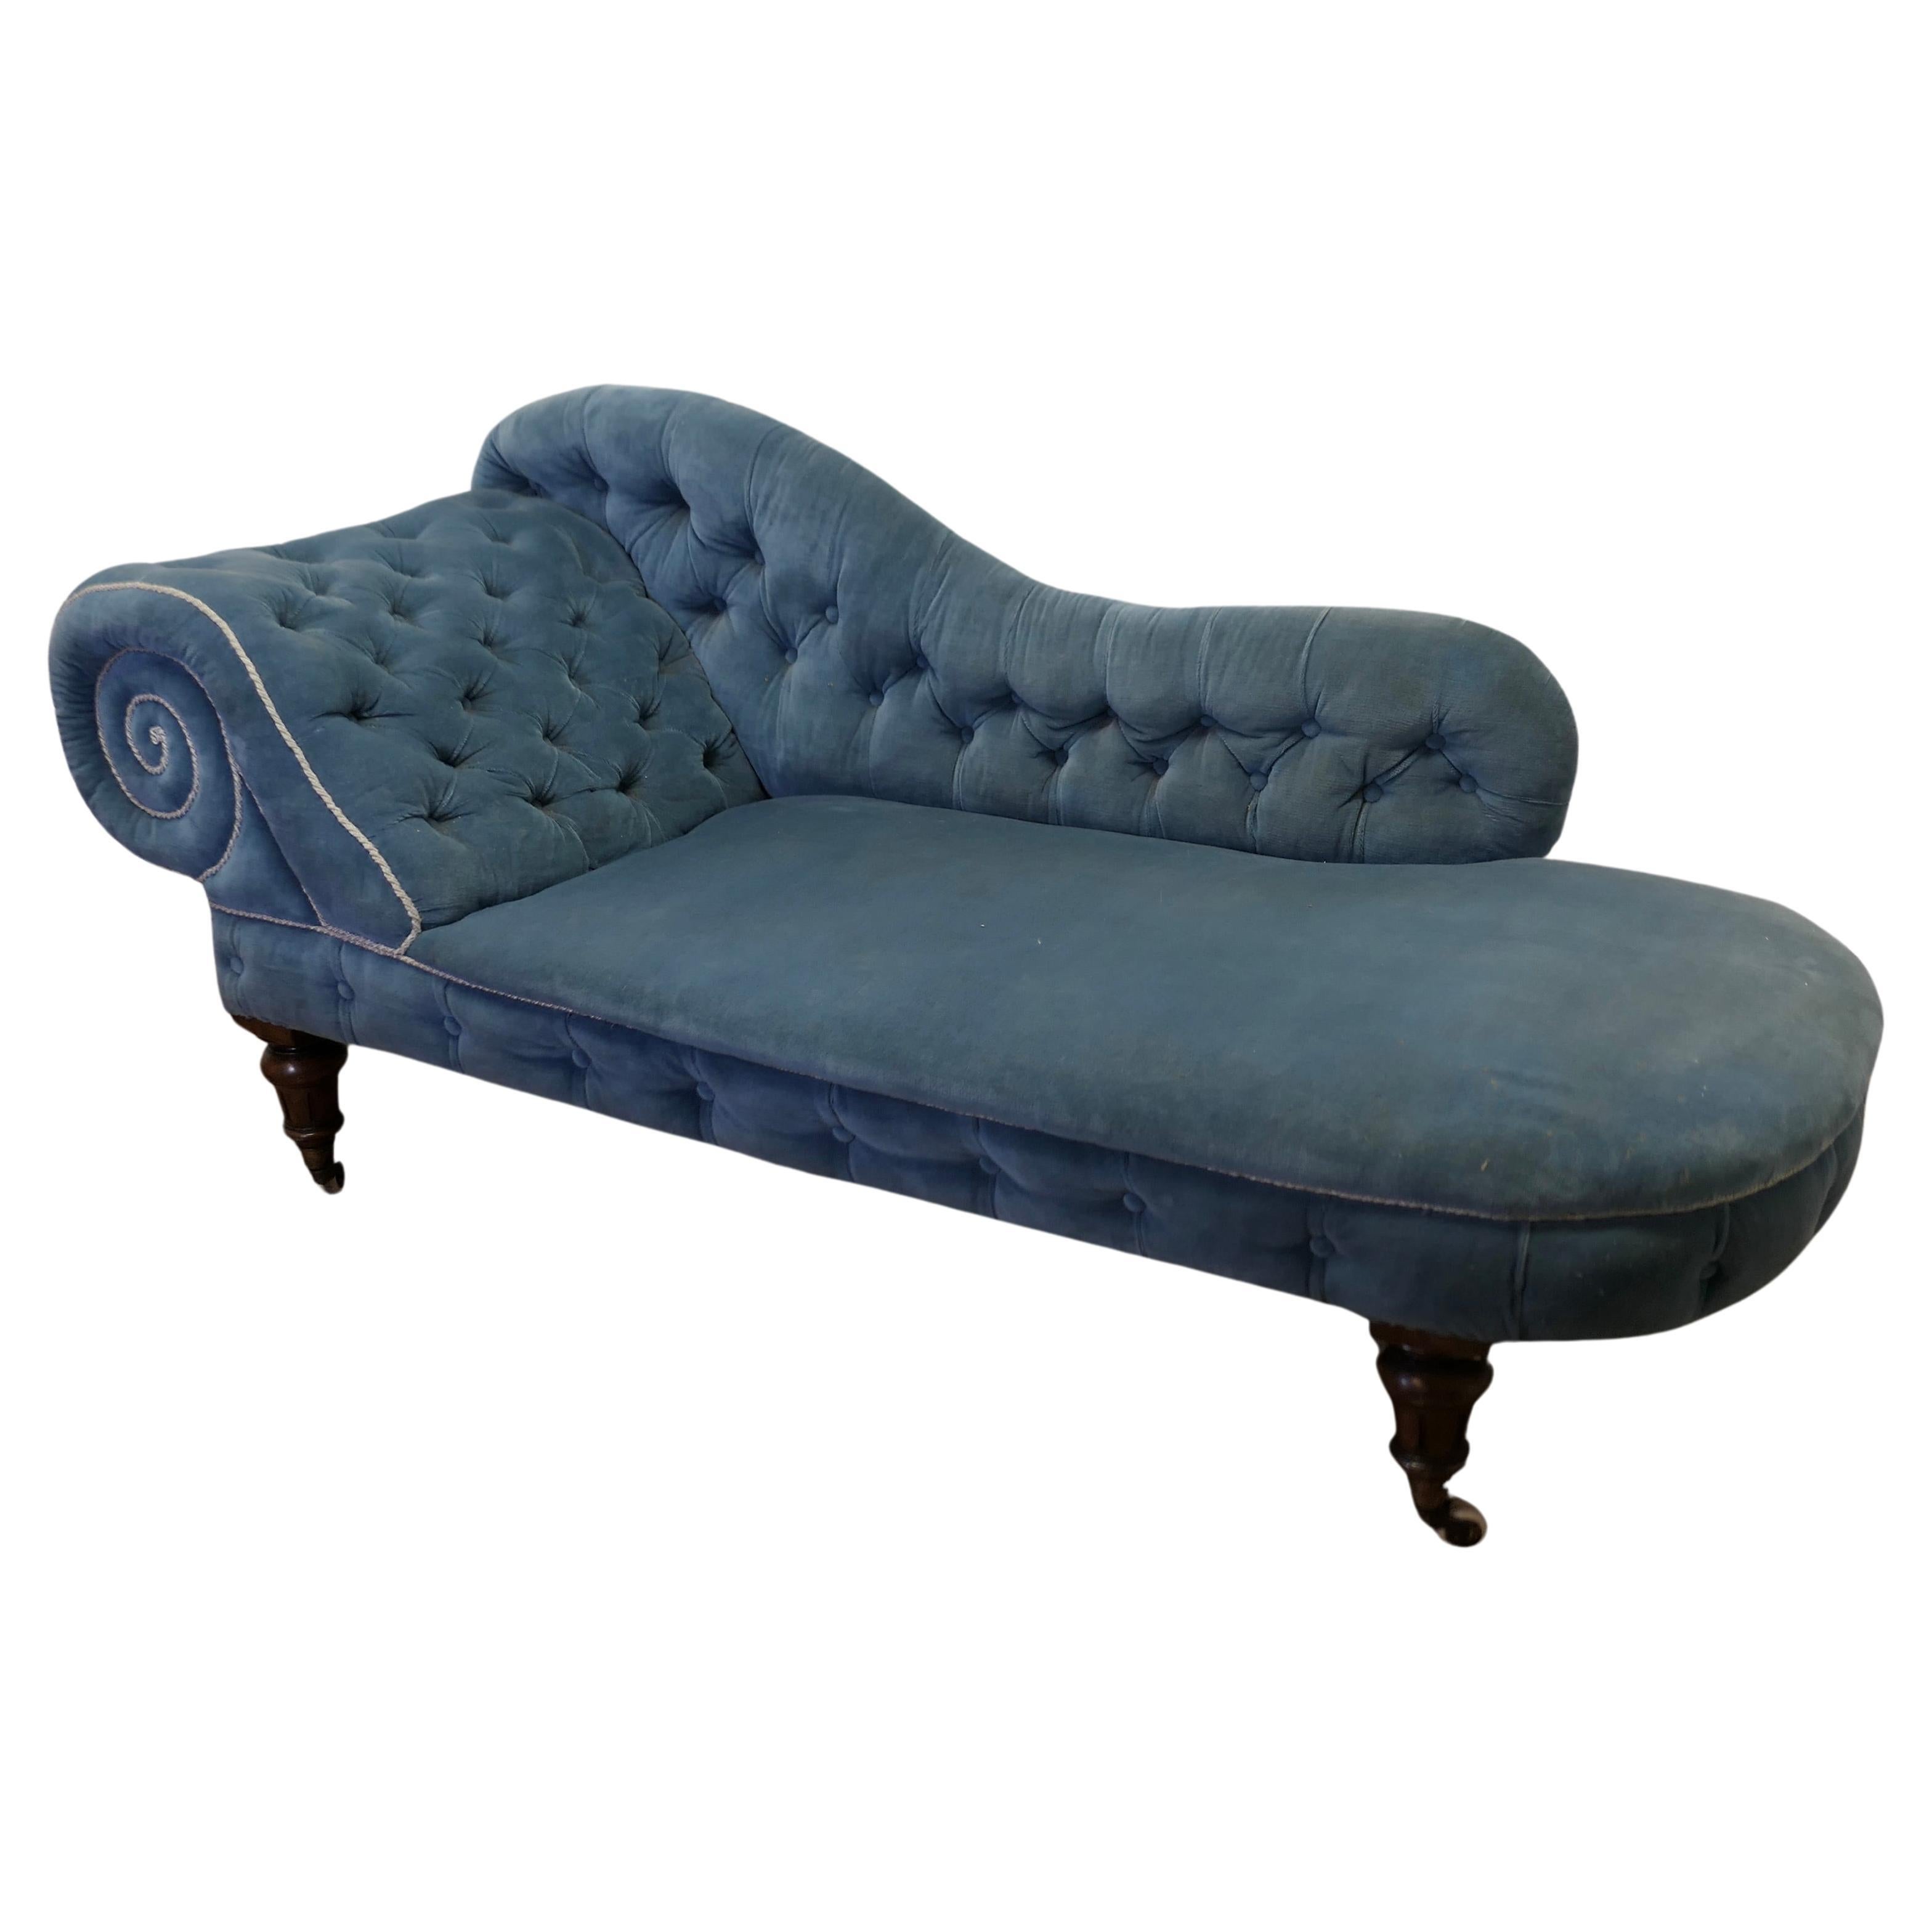 Very Stylish Victorian Velvet Chaise Longue or Day Bed   